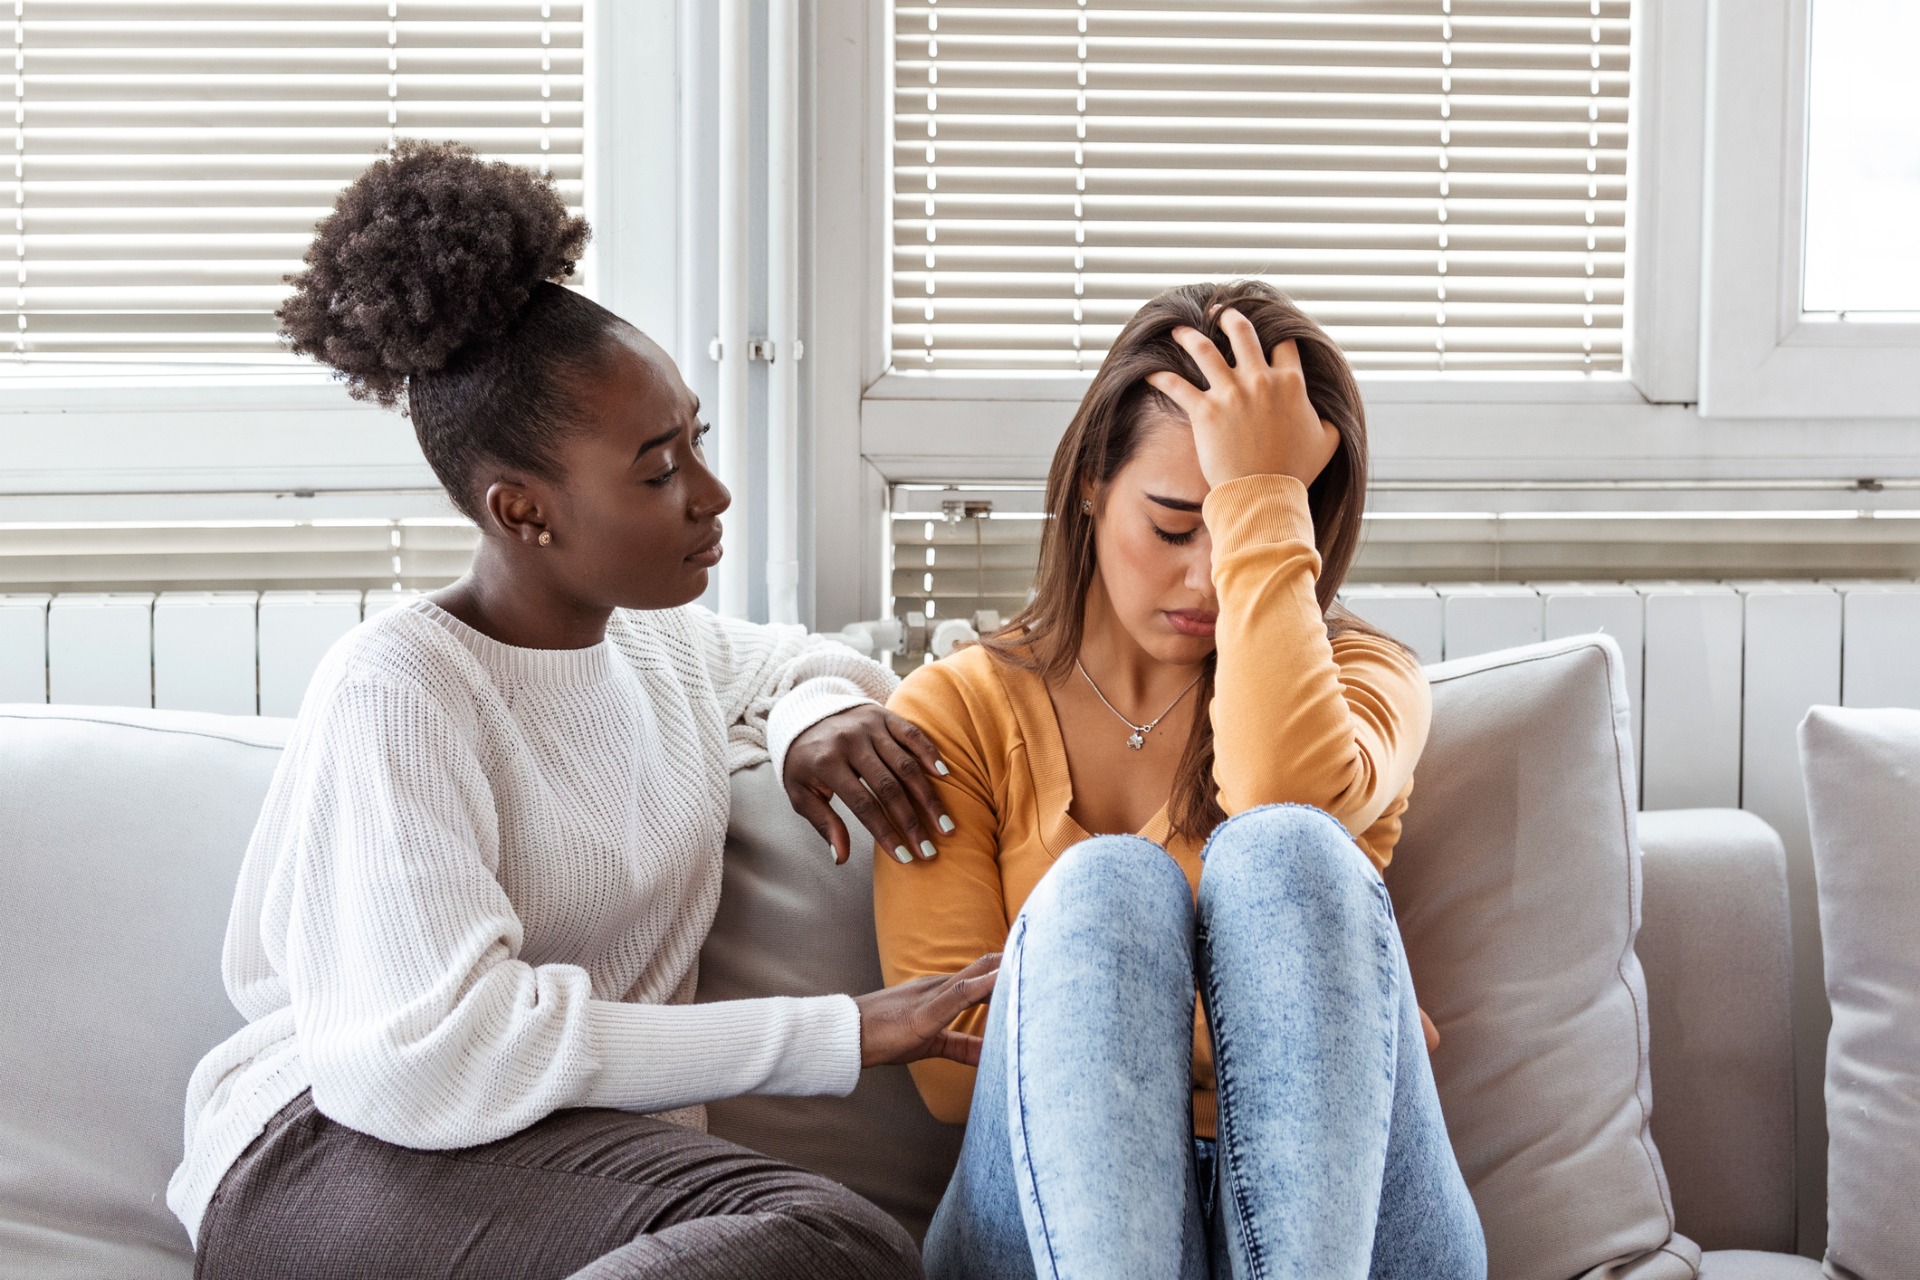 How-to-help-a-loved-one-who-is-fighting-depression